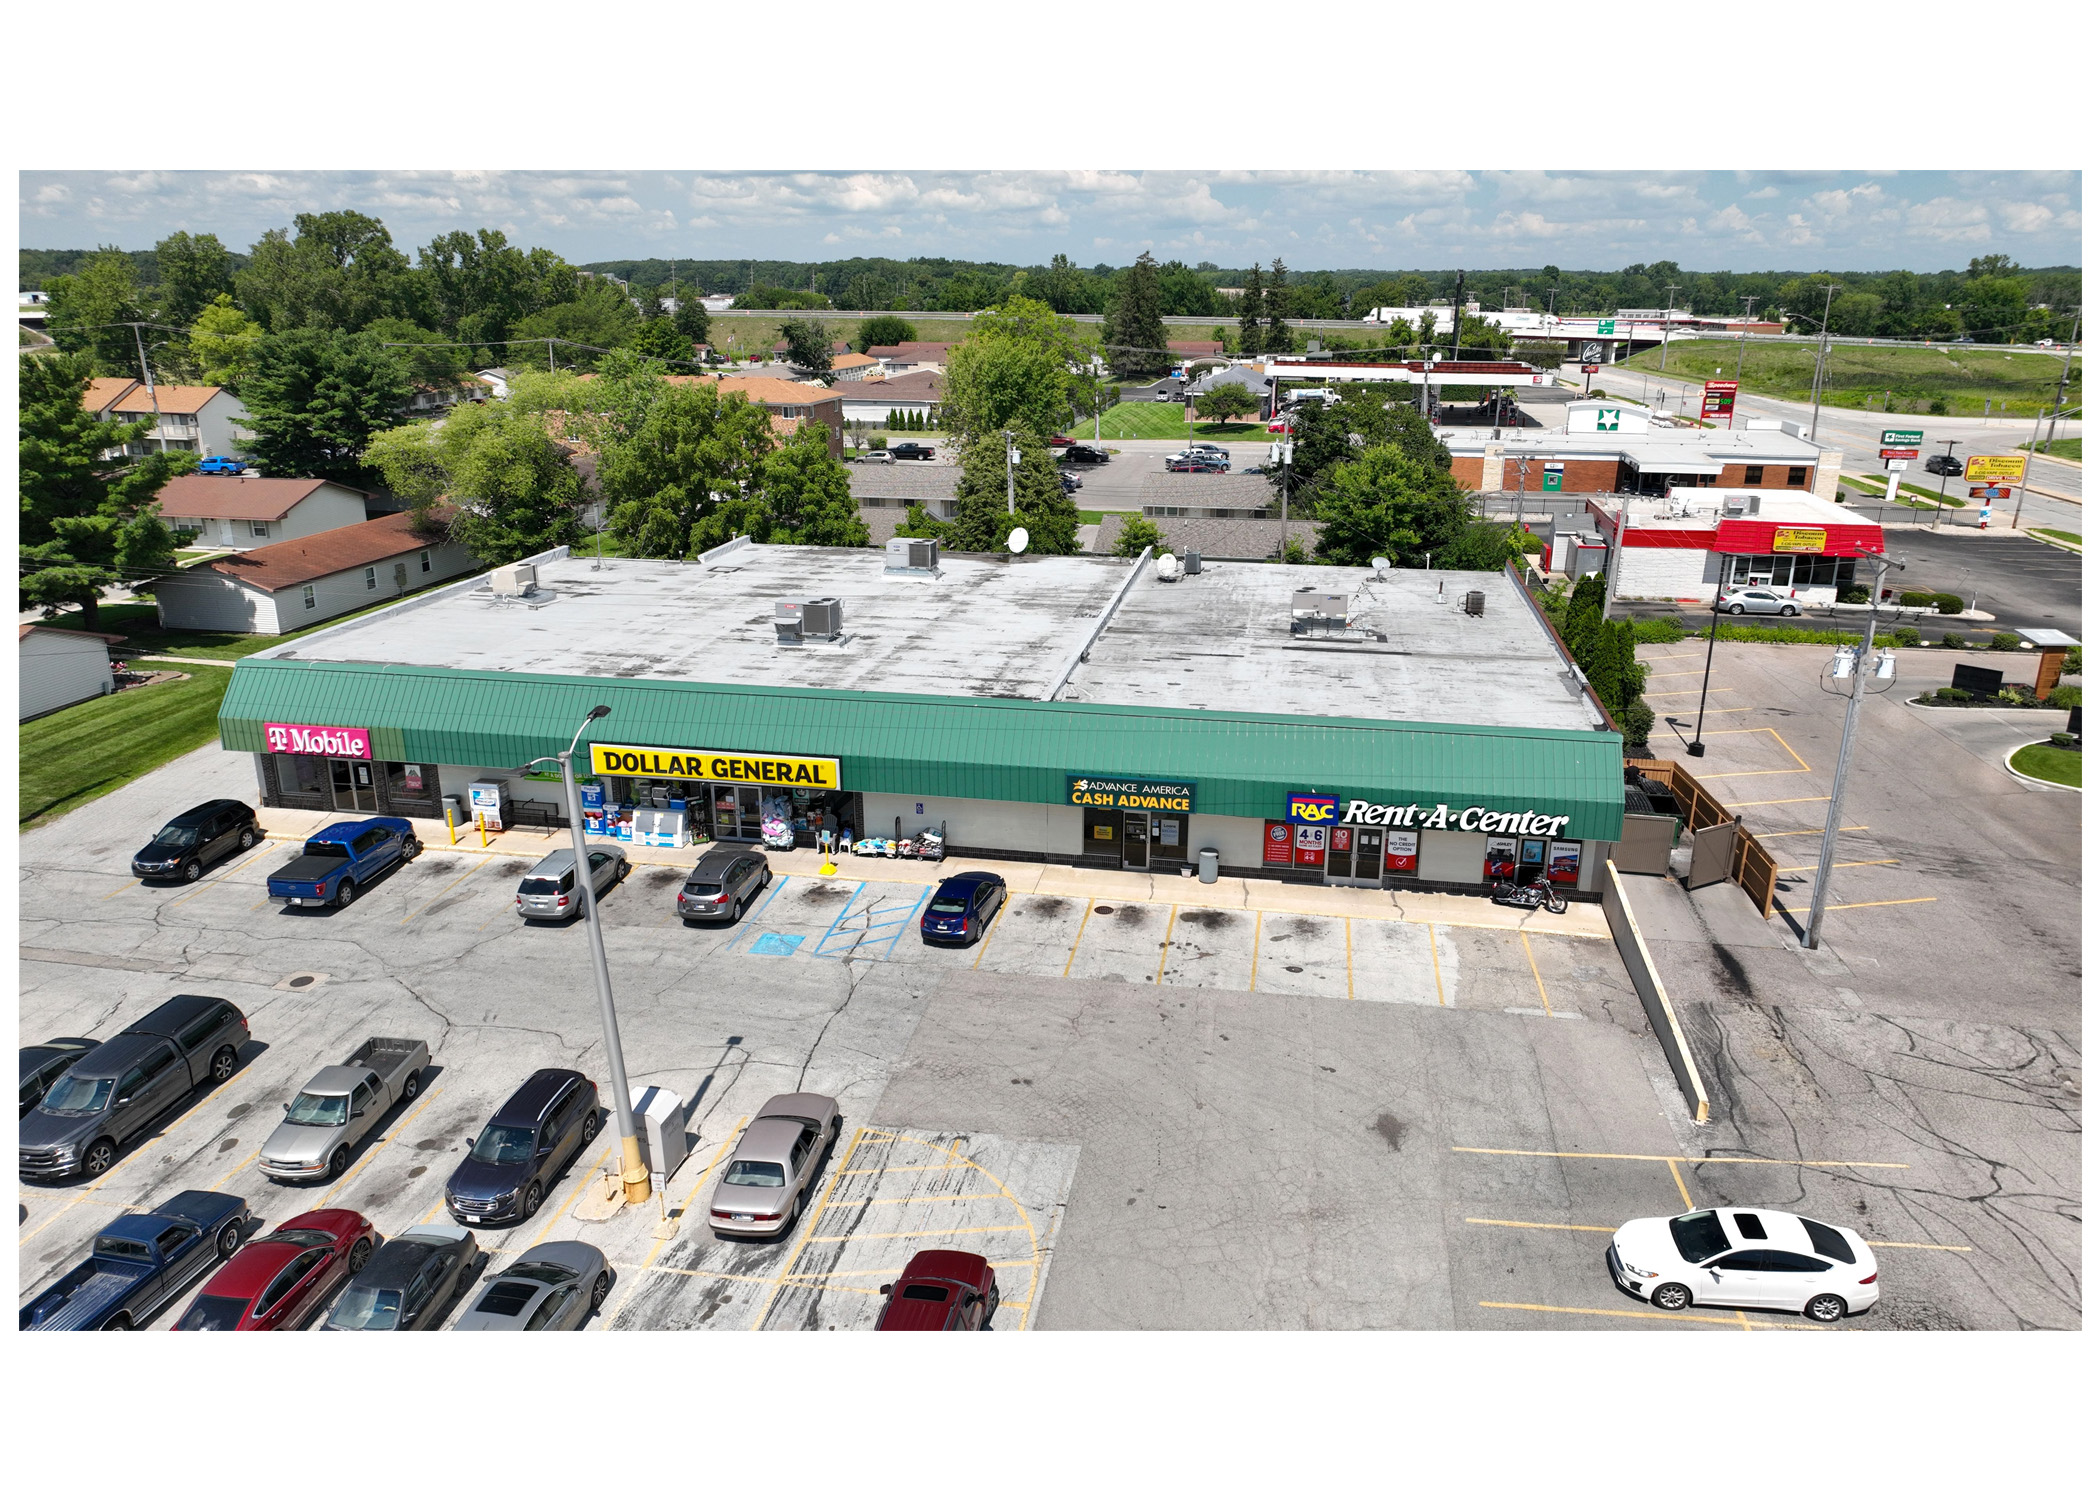 Plymouth Plaza, T-Mobile, Dollar General, Advance America Cash Advance and Rent A Center parking lot, aerial view.